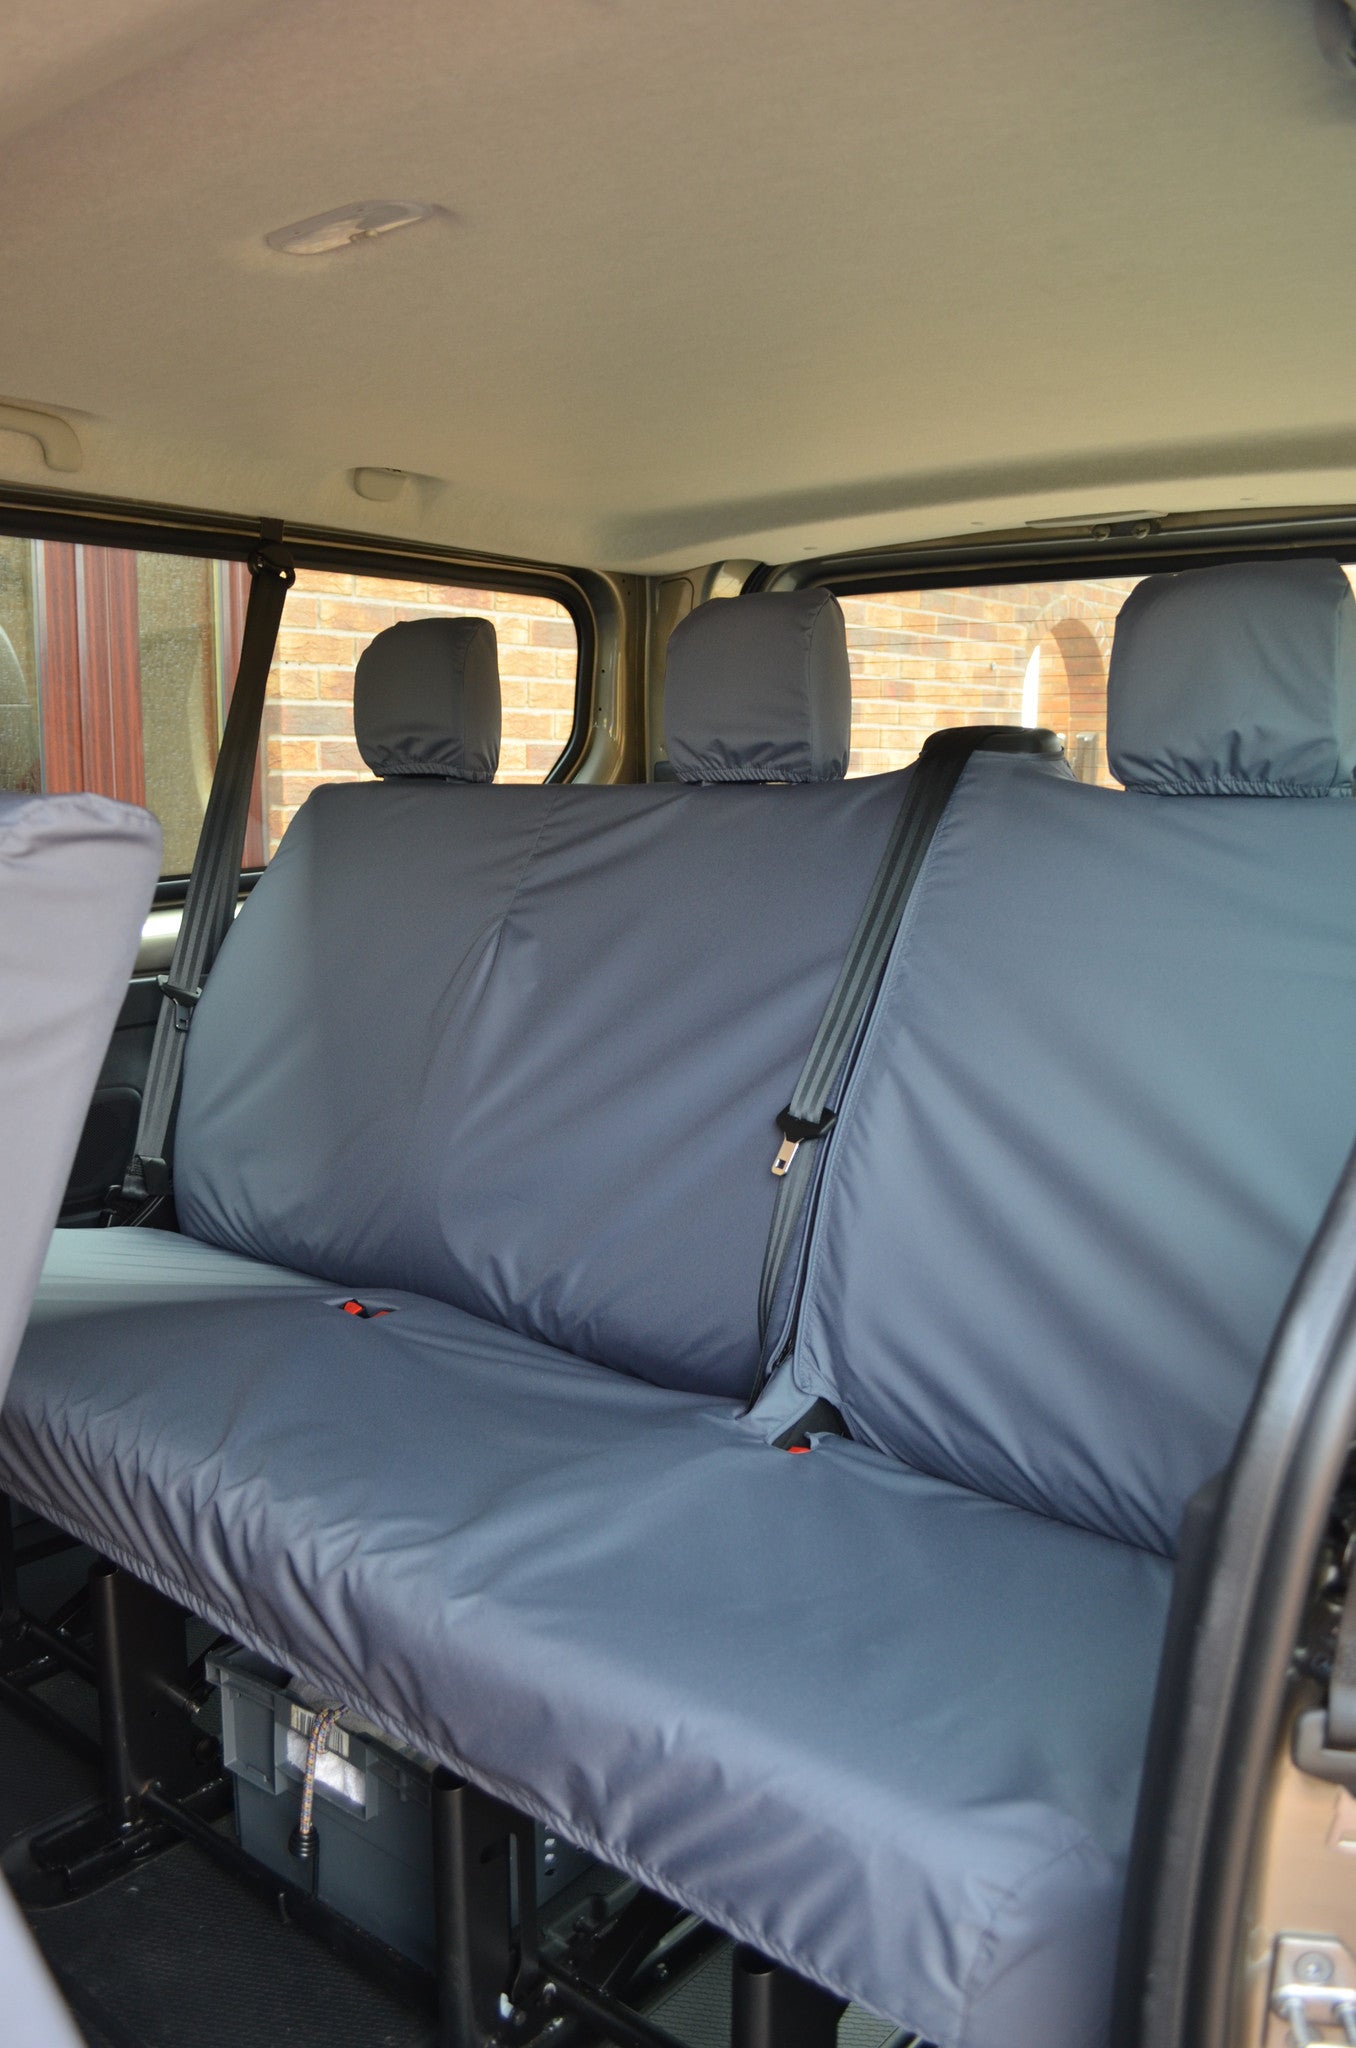 Fiat Talento Combi 2016+ 9-Seater Minibus Seat Covers Grey / 3rd Row Rear Turtle Covers Ltd